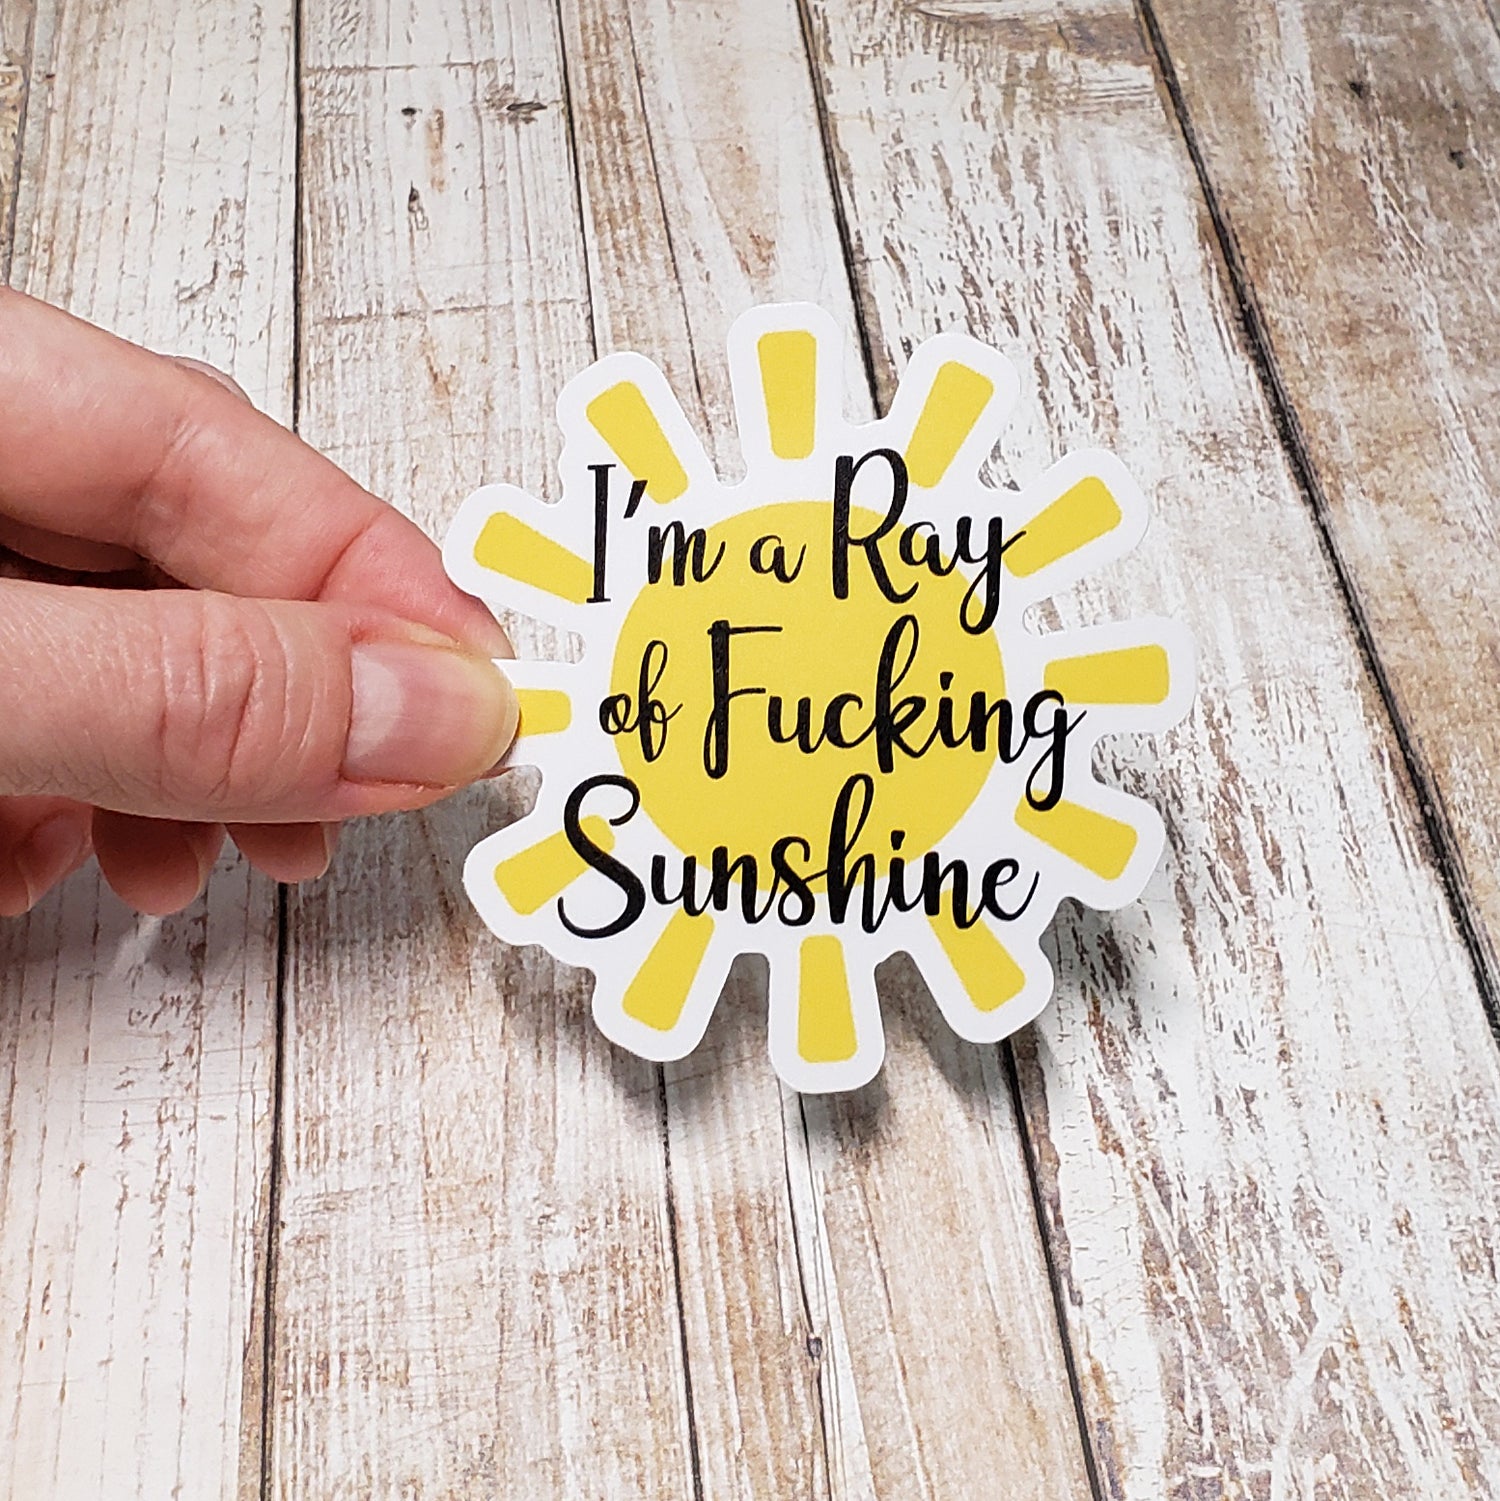 Vinyl Sticker with graphic yellow sunshine on white background with text reading "I'm a Ray of Fucking Sunshine" in black cursive font.